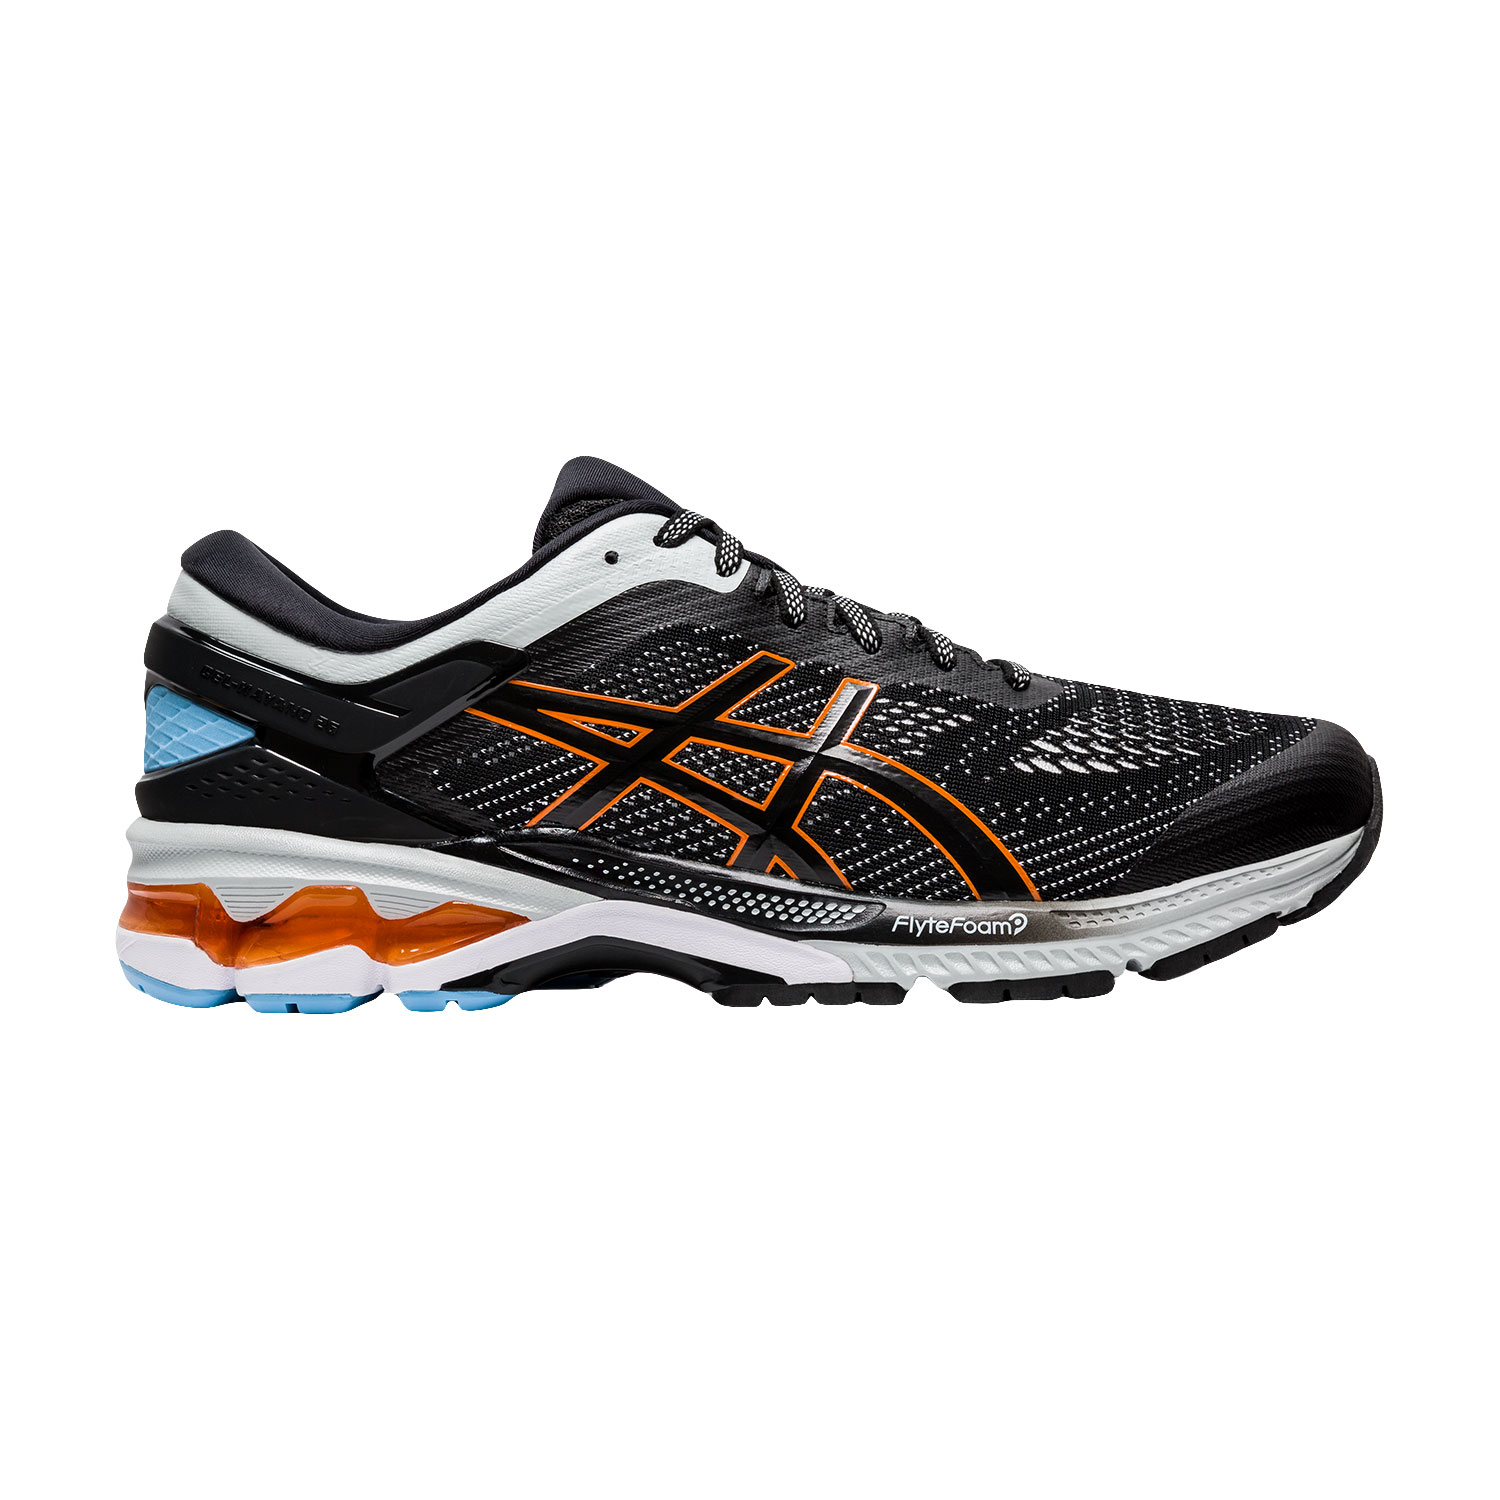 asics continental, OFF 72%,Buy!